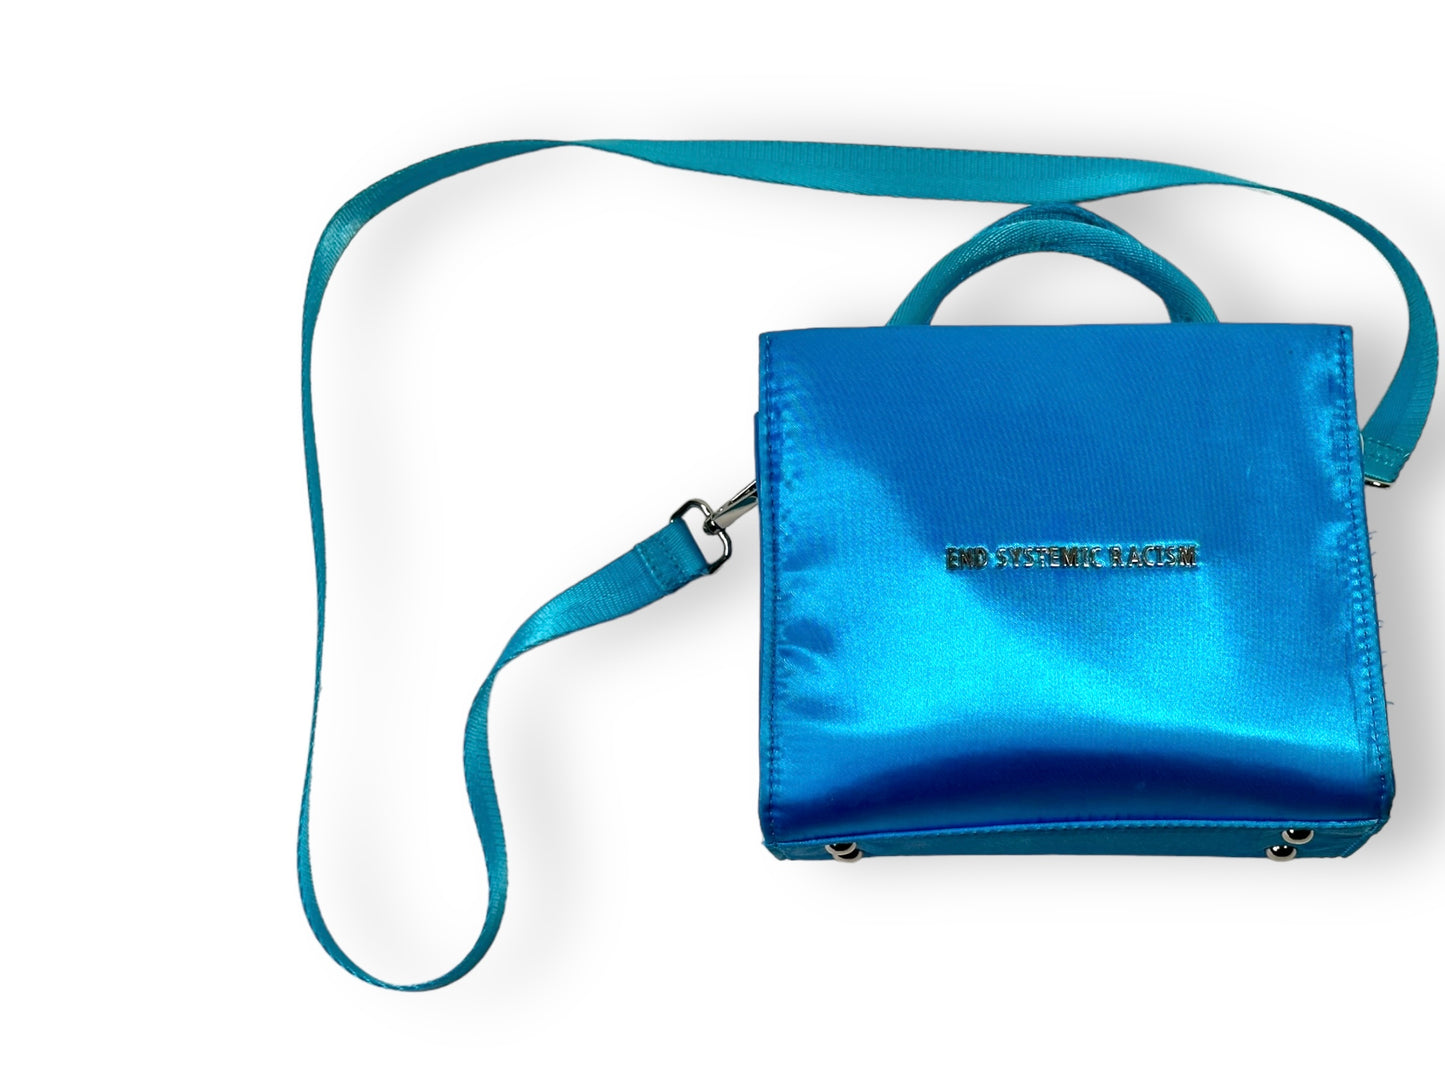 Trend: Brandon Blackwood “End Systematic Racism” Micro Bag (Blue)